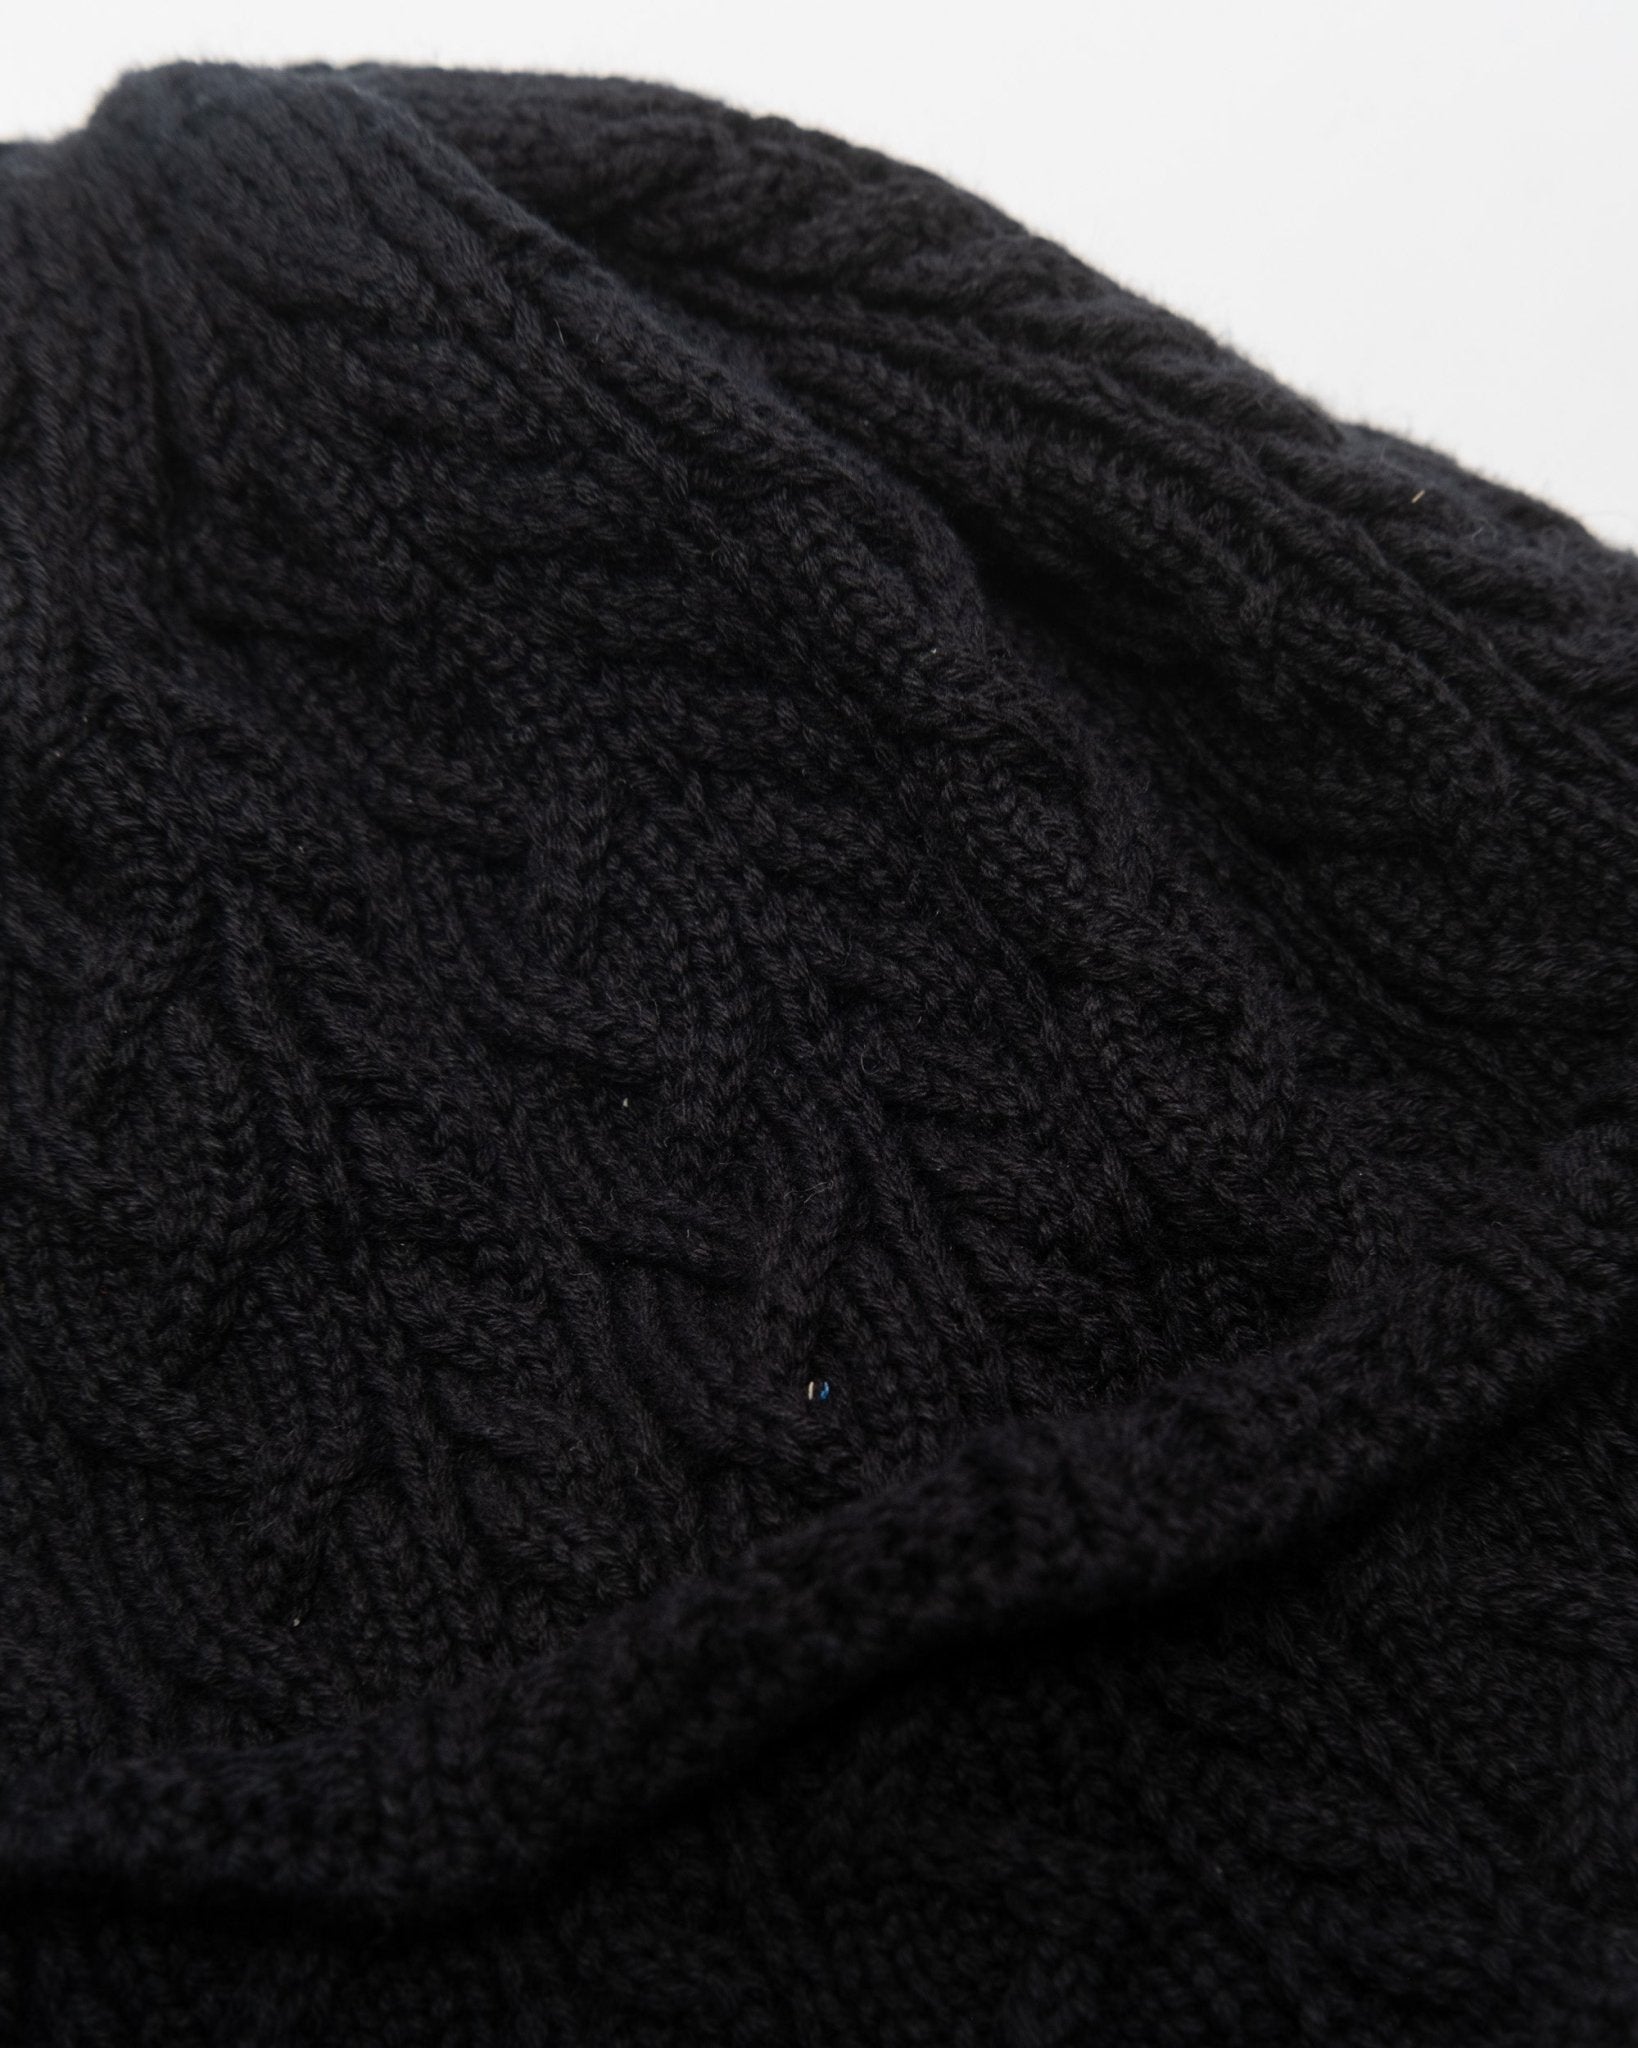 Fisherman Cable Knit Hat Black - Meadow